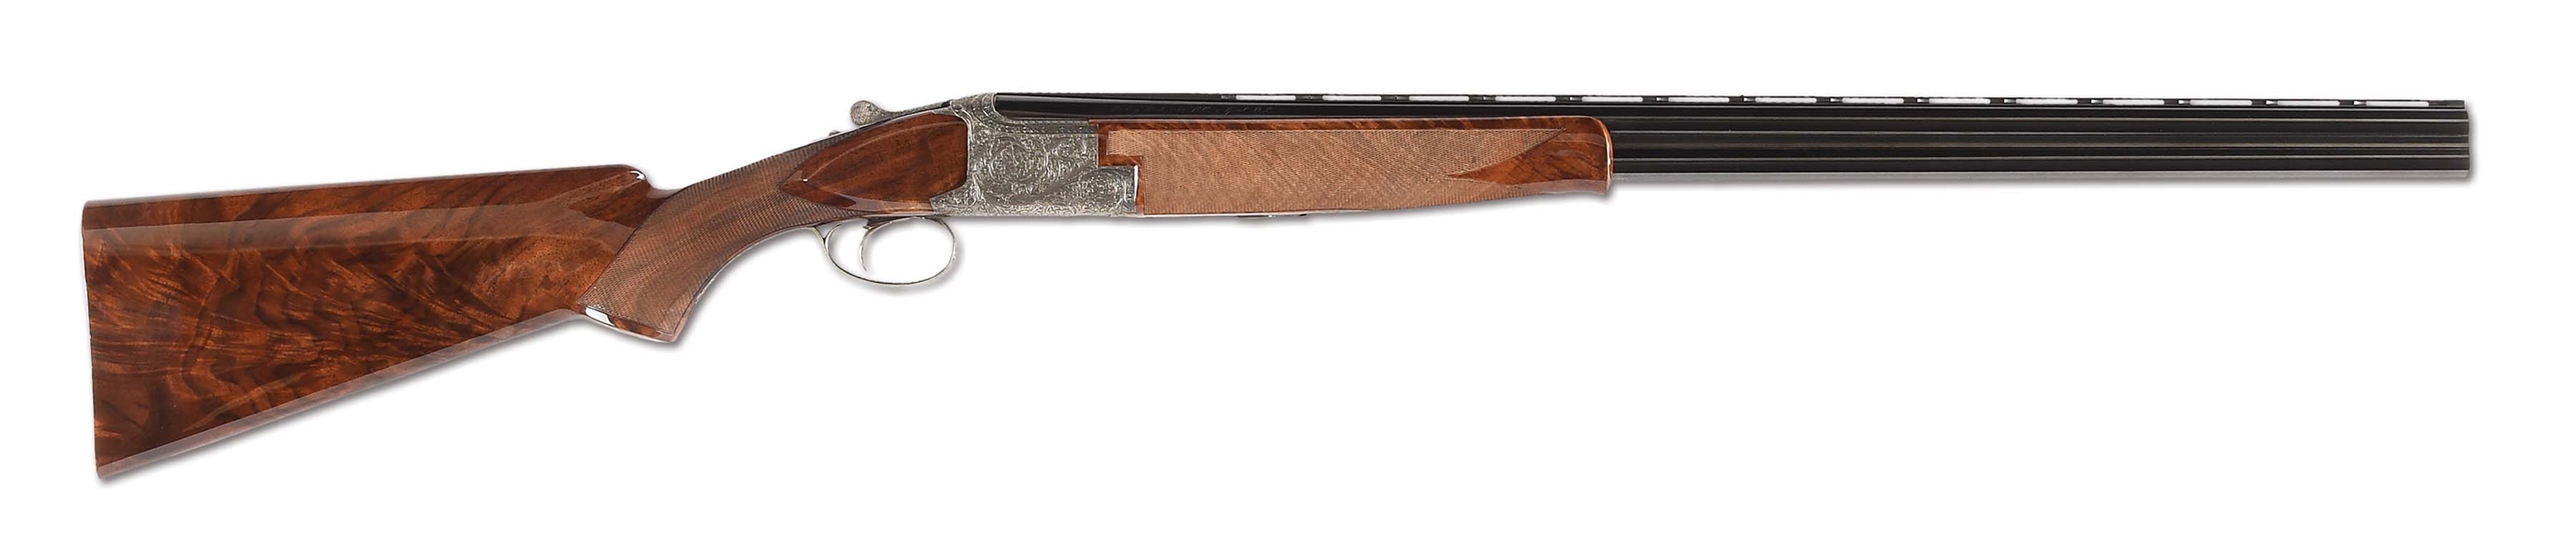 (M) 20 GAUGE BROWNING "C" SERIES "EXHIBITION" SUPERPOSED SHOTGUN WITH SUPERB BAROQUE SCROLL BY C.  BAERTEN WITH CASE